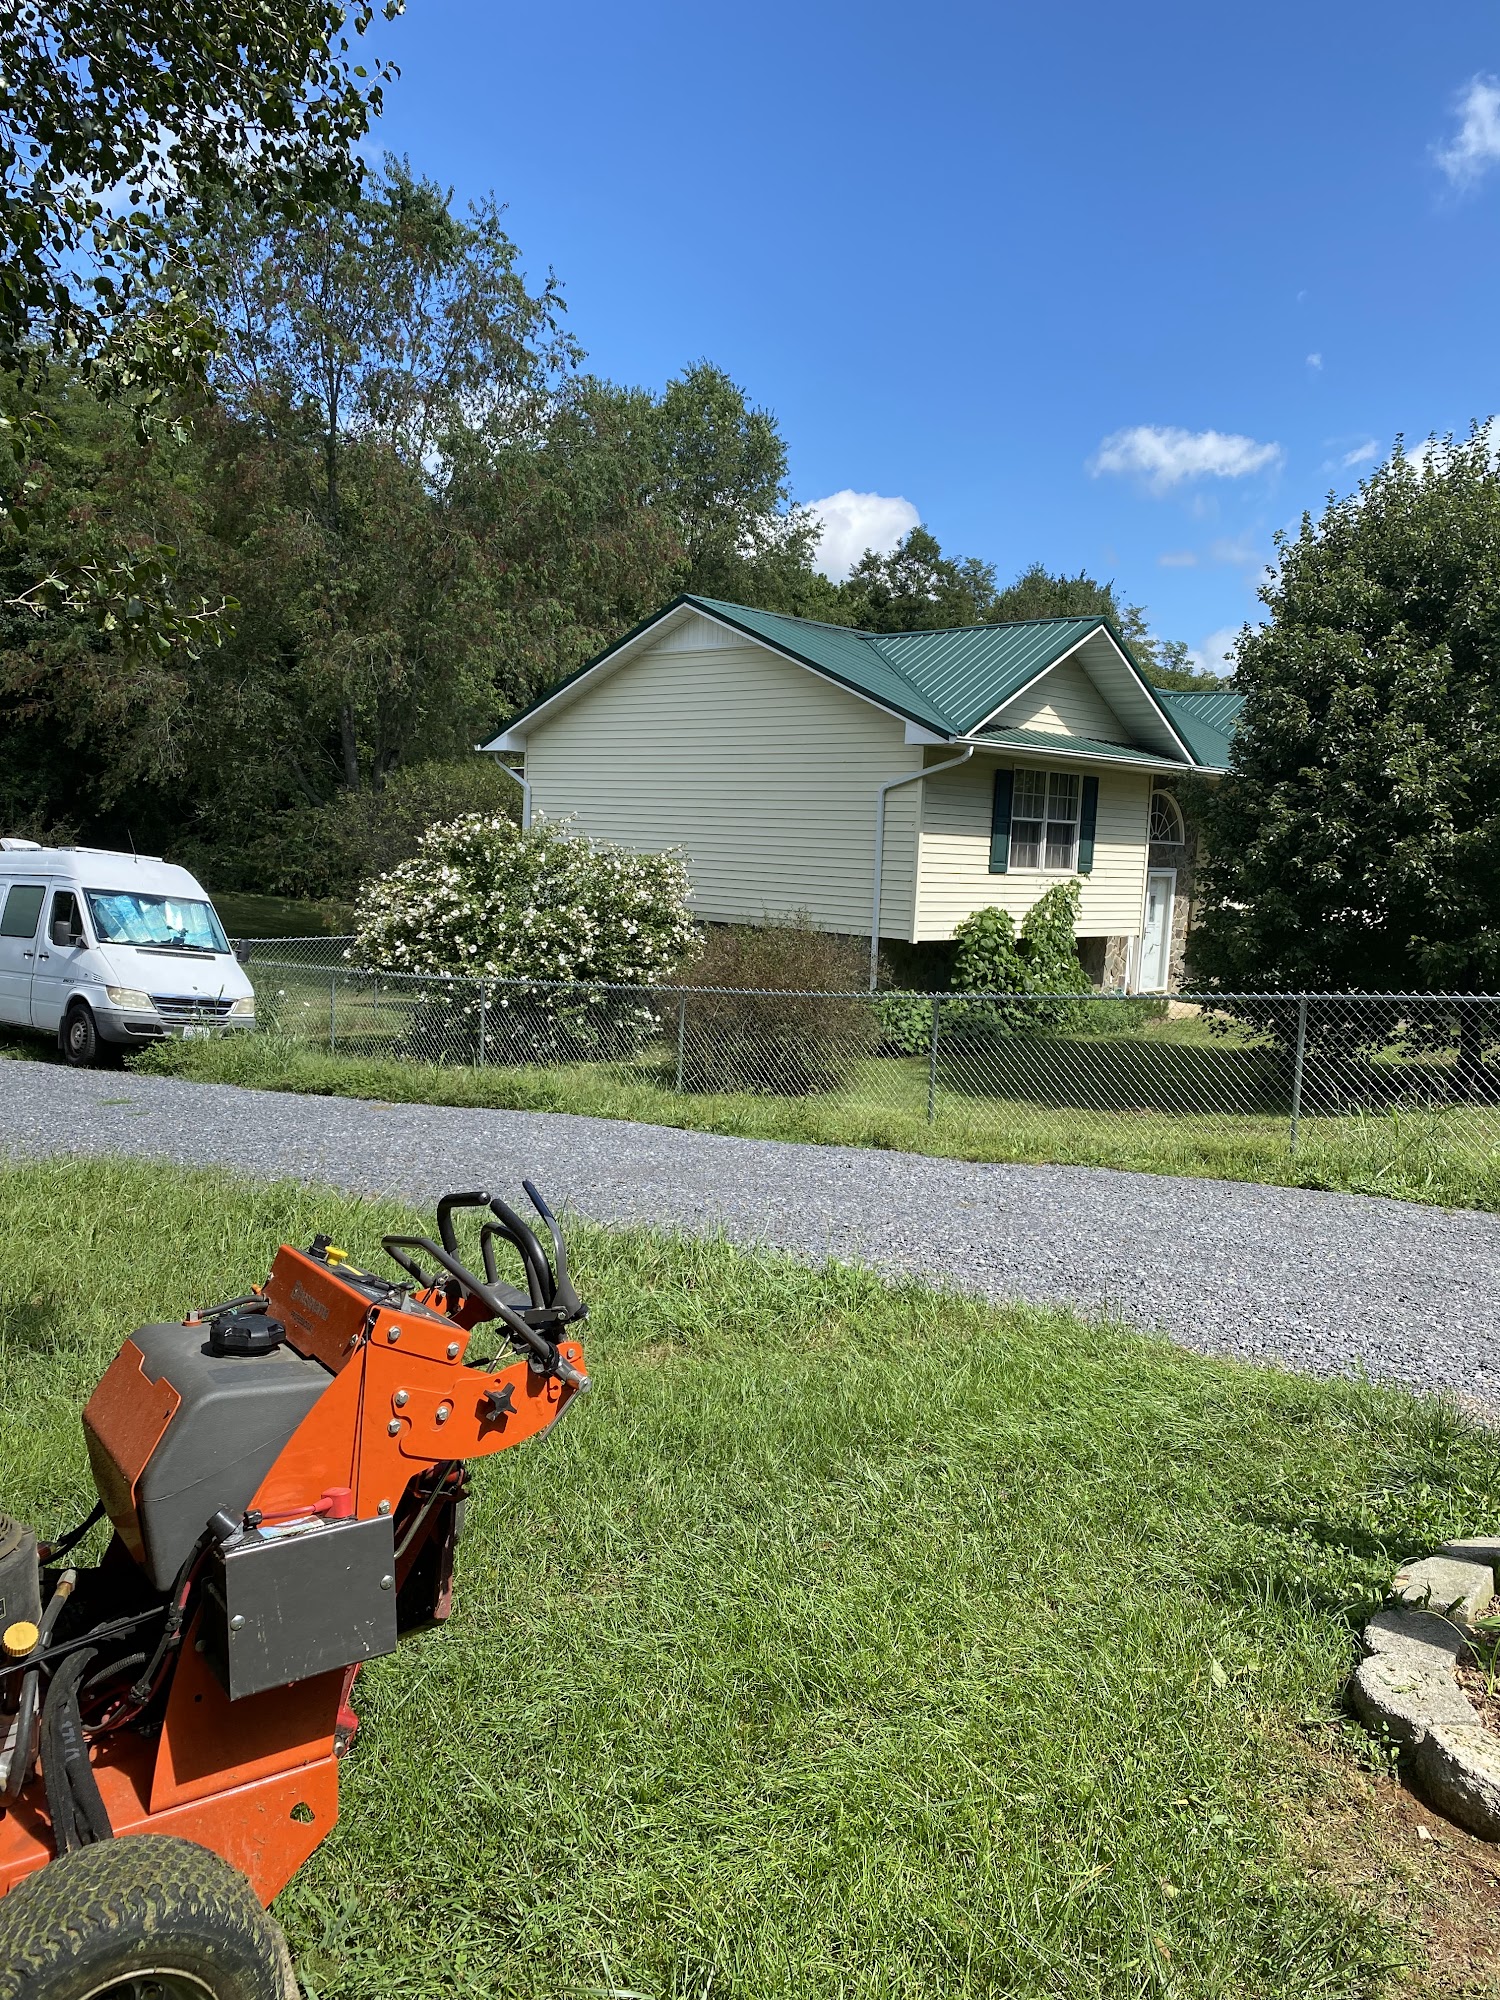 GROUND CONTROL LAWN CARE SERVICE 801 Green St, Church Hill Tennessee 37642